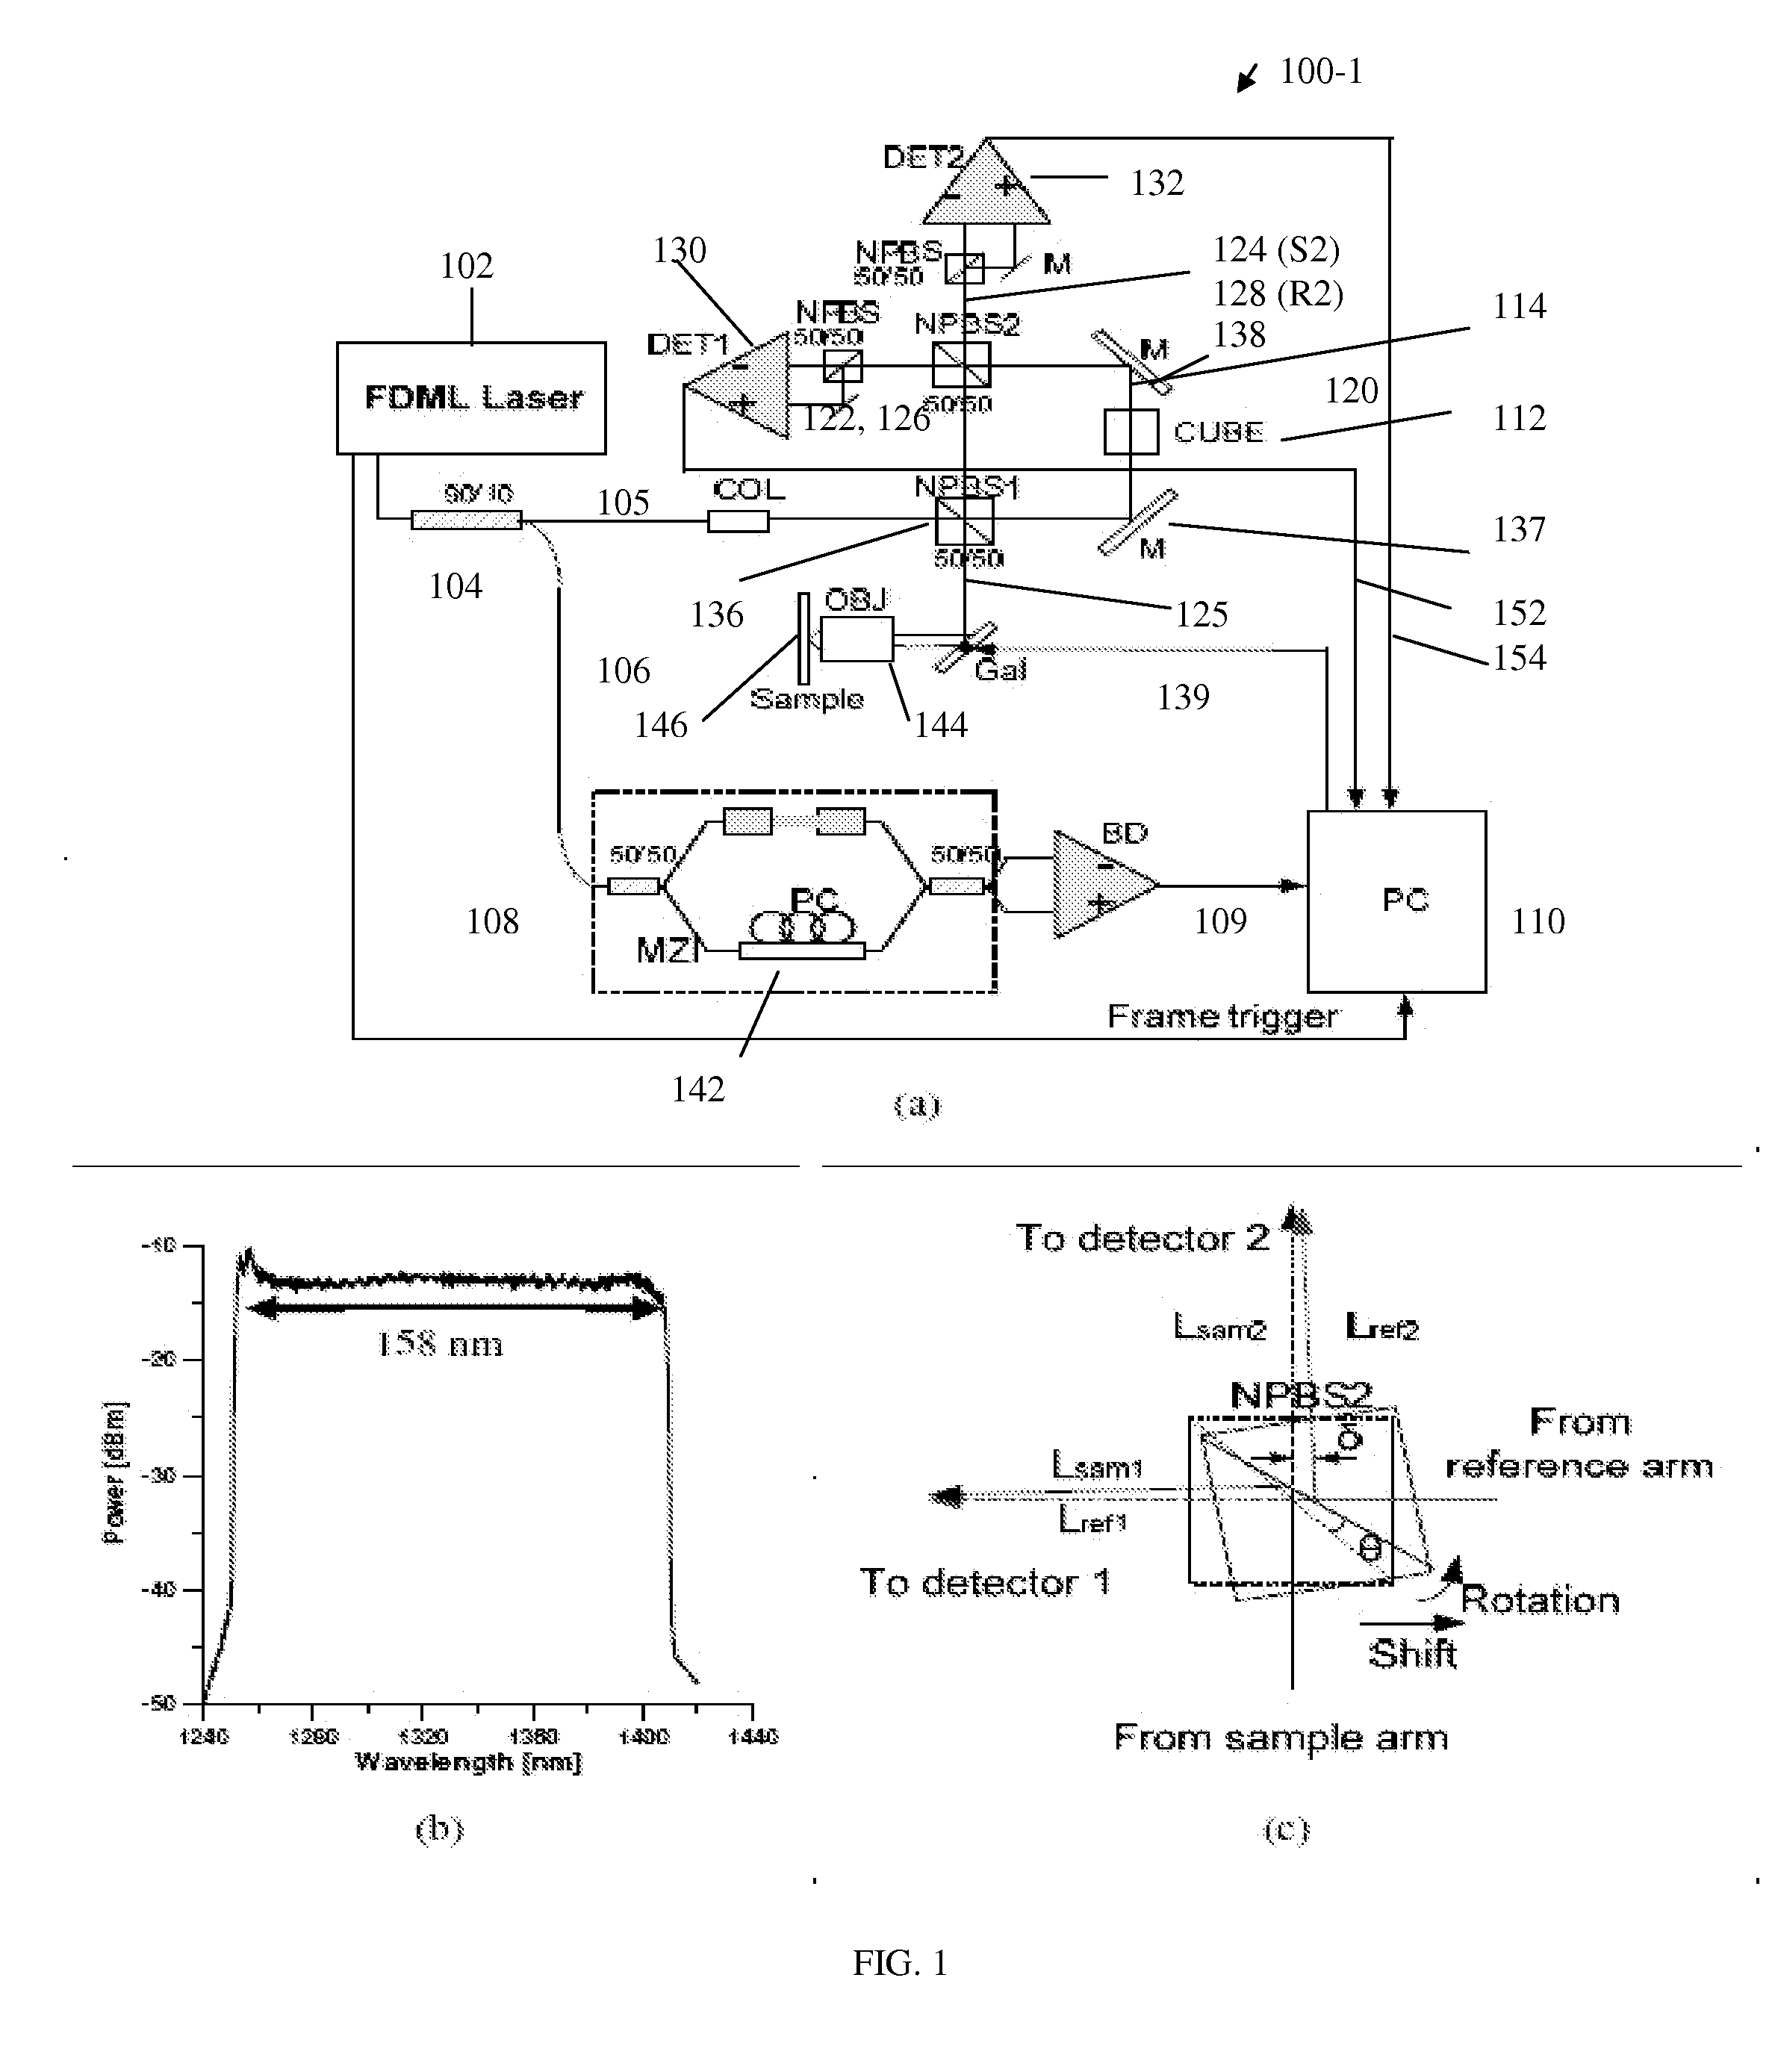 Optical coherence tomography (OCT) apparatus, methods, and applications